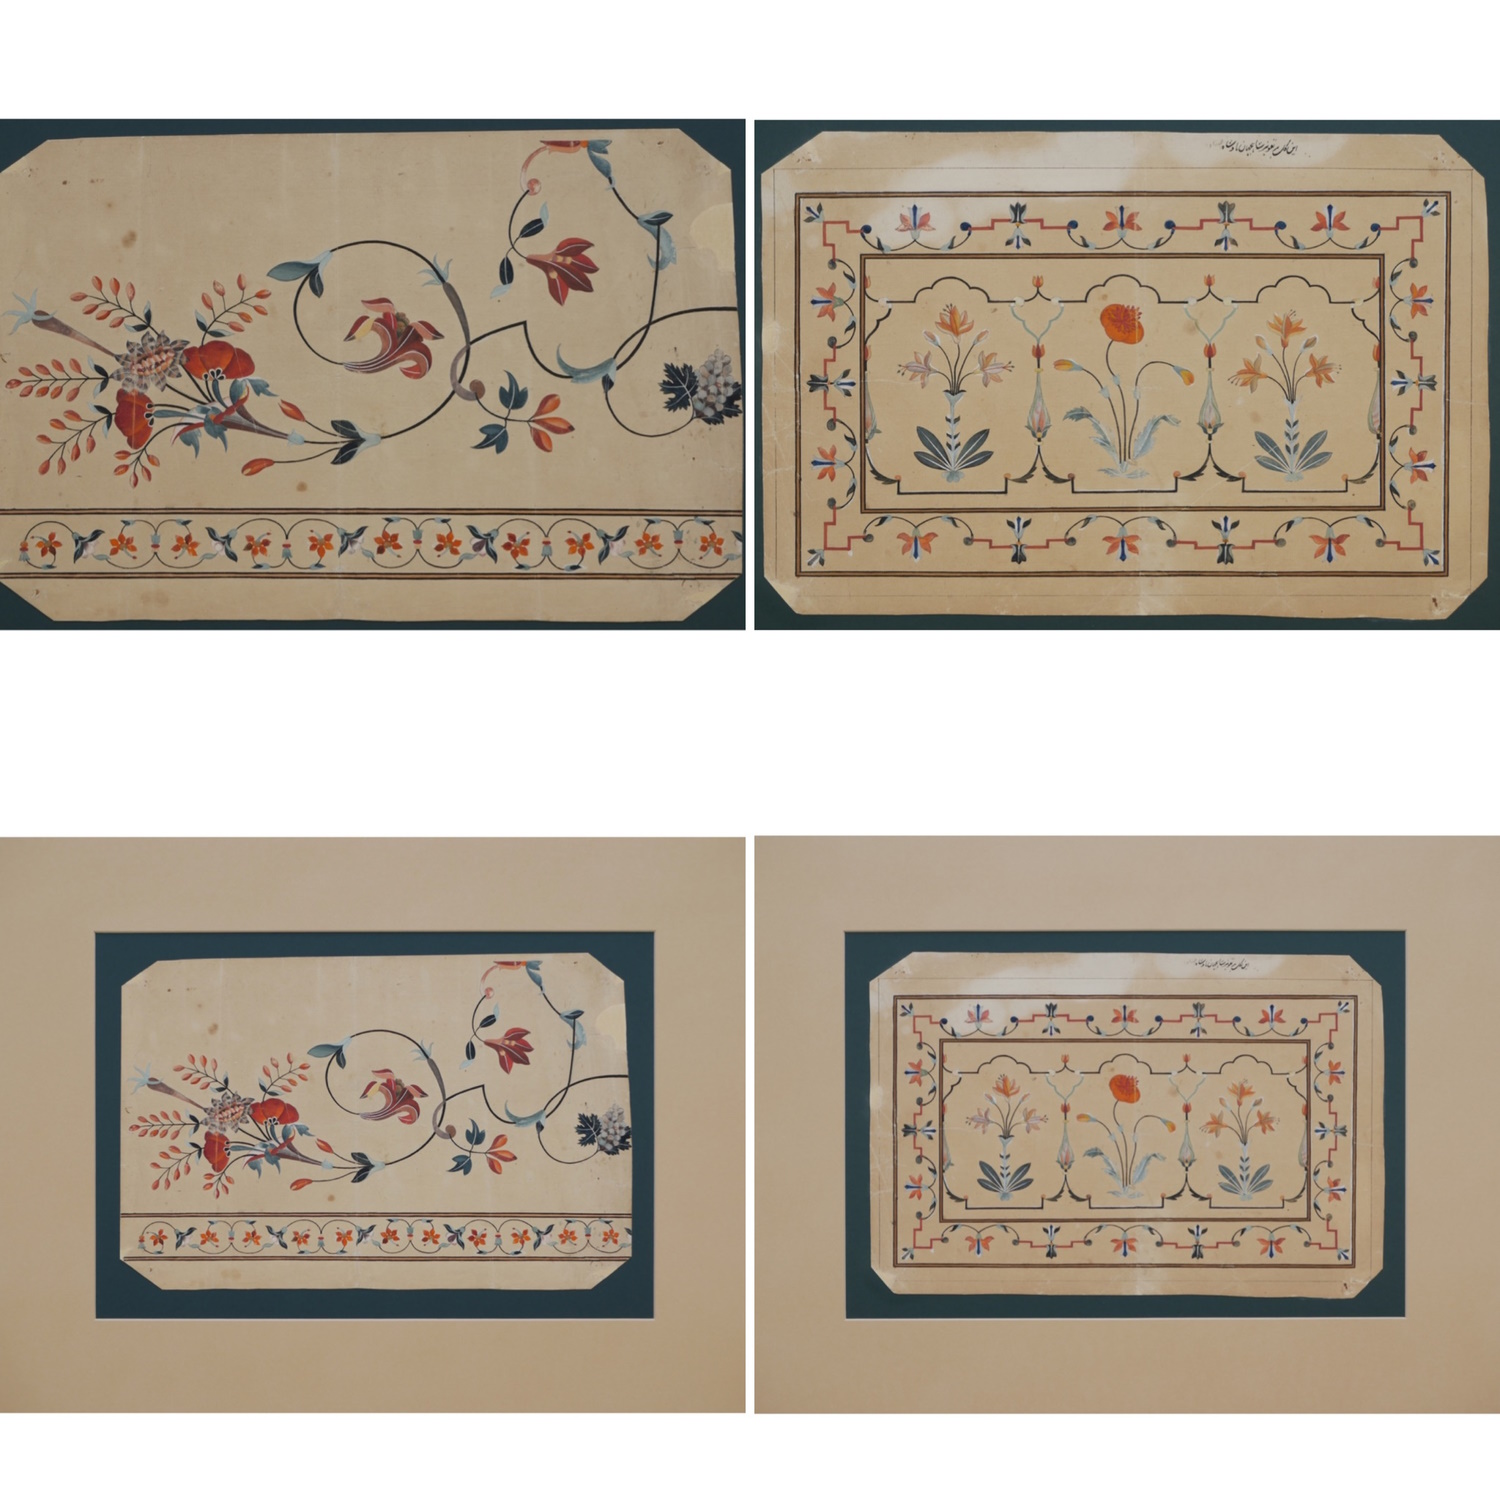 Mughal School (late 18thc.) A Pair of drawings of Inlaid marble work ‘pietra dura’ from The Cenotaphs of Shah Jahan and his wife Mumtaz Mahal at the Taj Mahal, Agra, India.